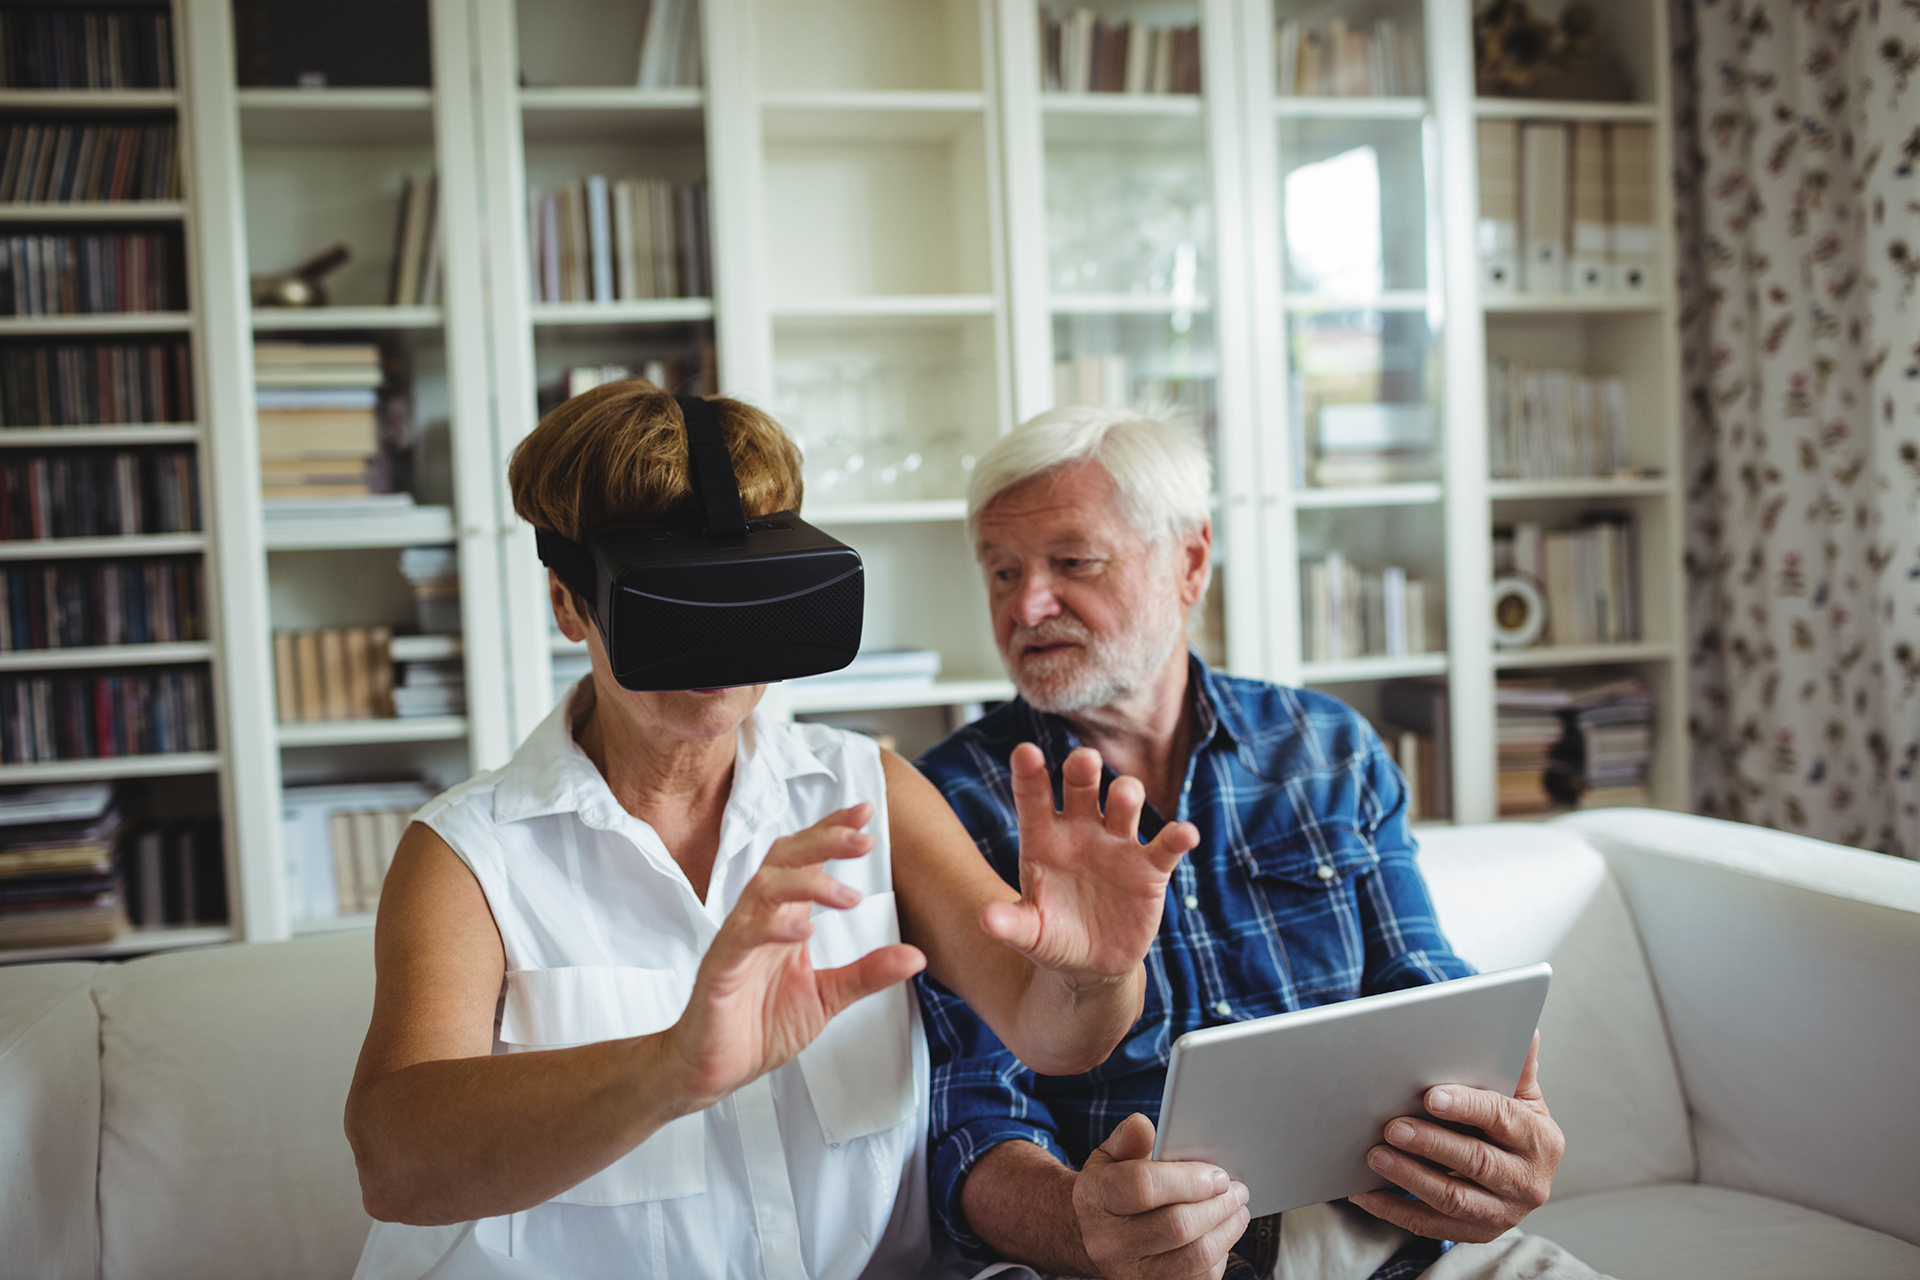 An older couple using a VR headset, which may help improve cognitive function